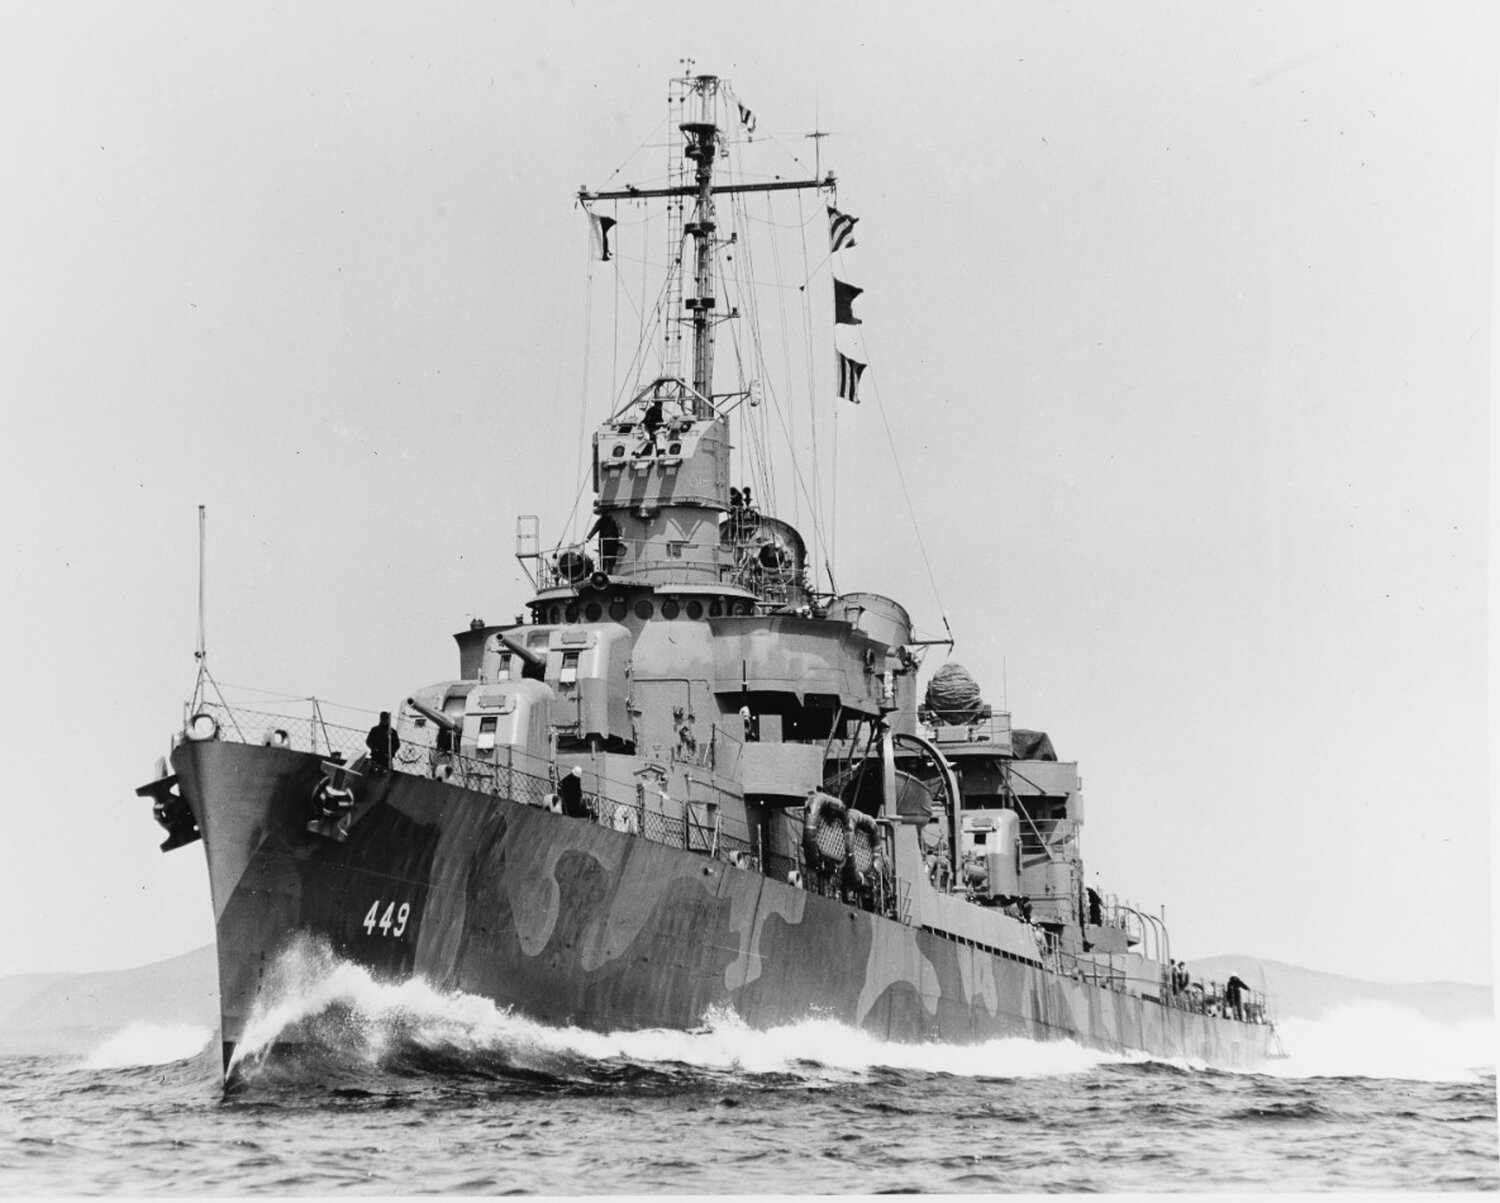 The U.S.S. Nicholas, DD-449, is pictured during its sea trials in the Atlantic Ocean off the shore of Maine on May 28, 1942. Photo courtesy the National Archives.